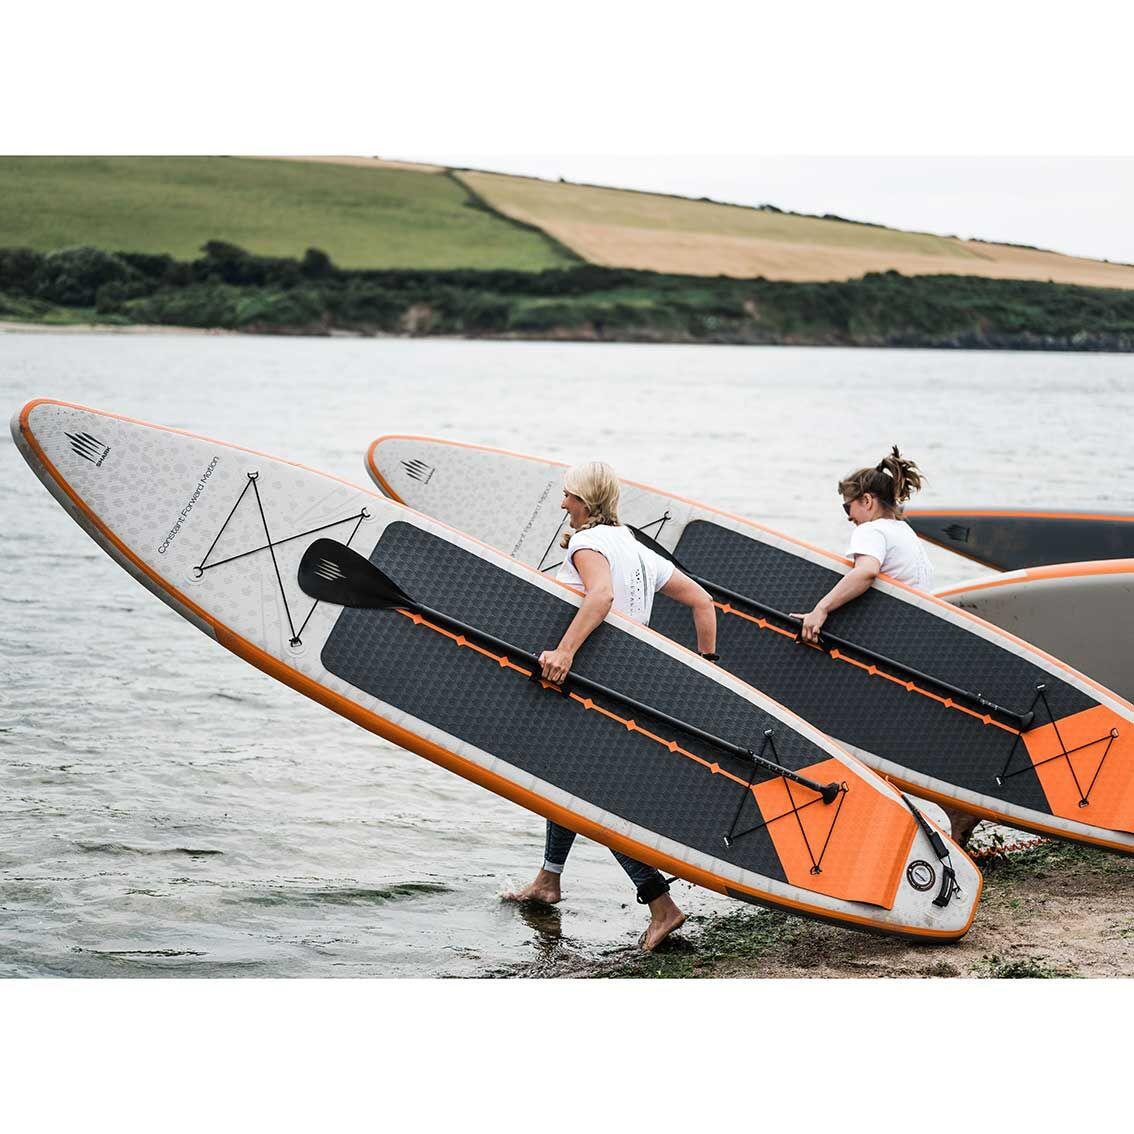 SHARK TOURING 12'6 x 32" x 6" FOR RIDERS WANTING GLIDE AND STABILTY 4/4